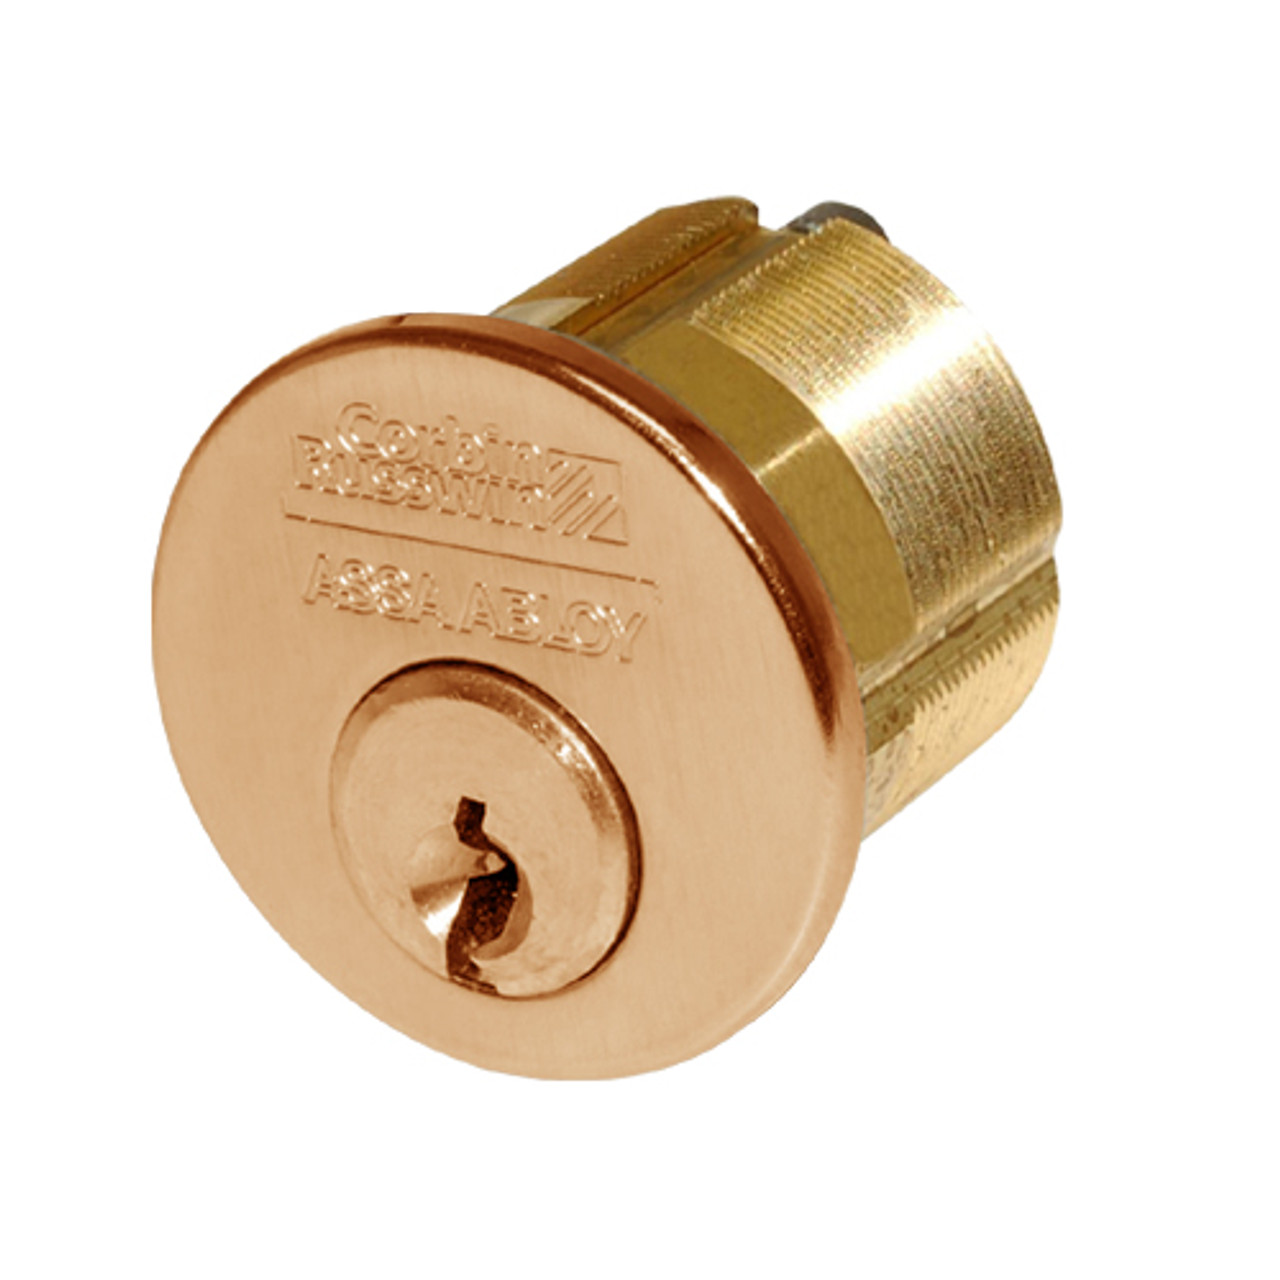 CR1000-118-A02-6-59D1-612 Corbin Conventional Mortise Cylinder for Mortise Lock and DL3000 Deadlocks with Straight Cam in Satin Bronze Finish